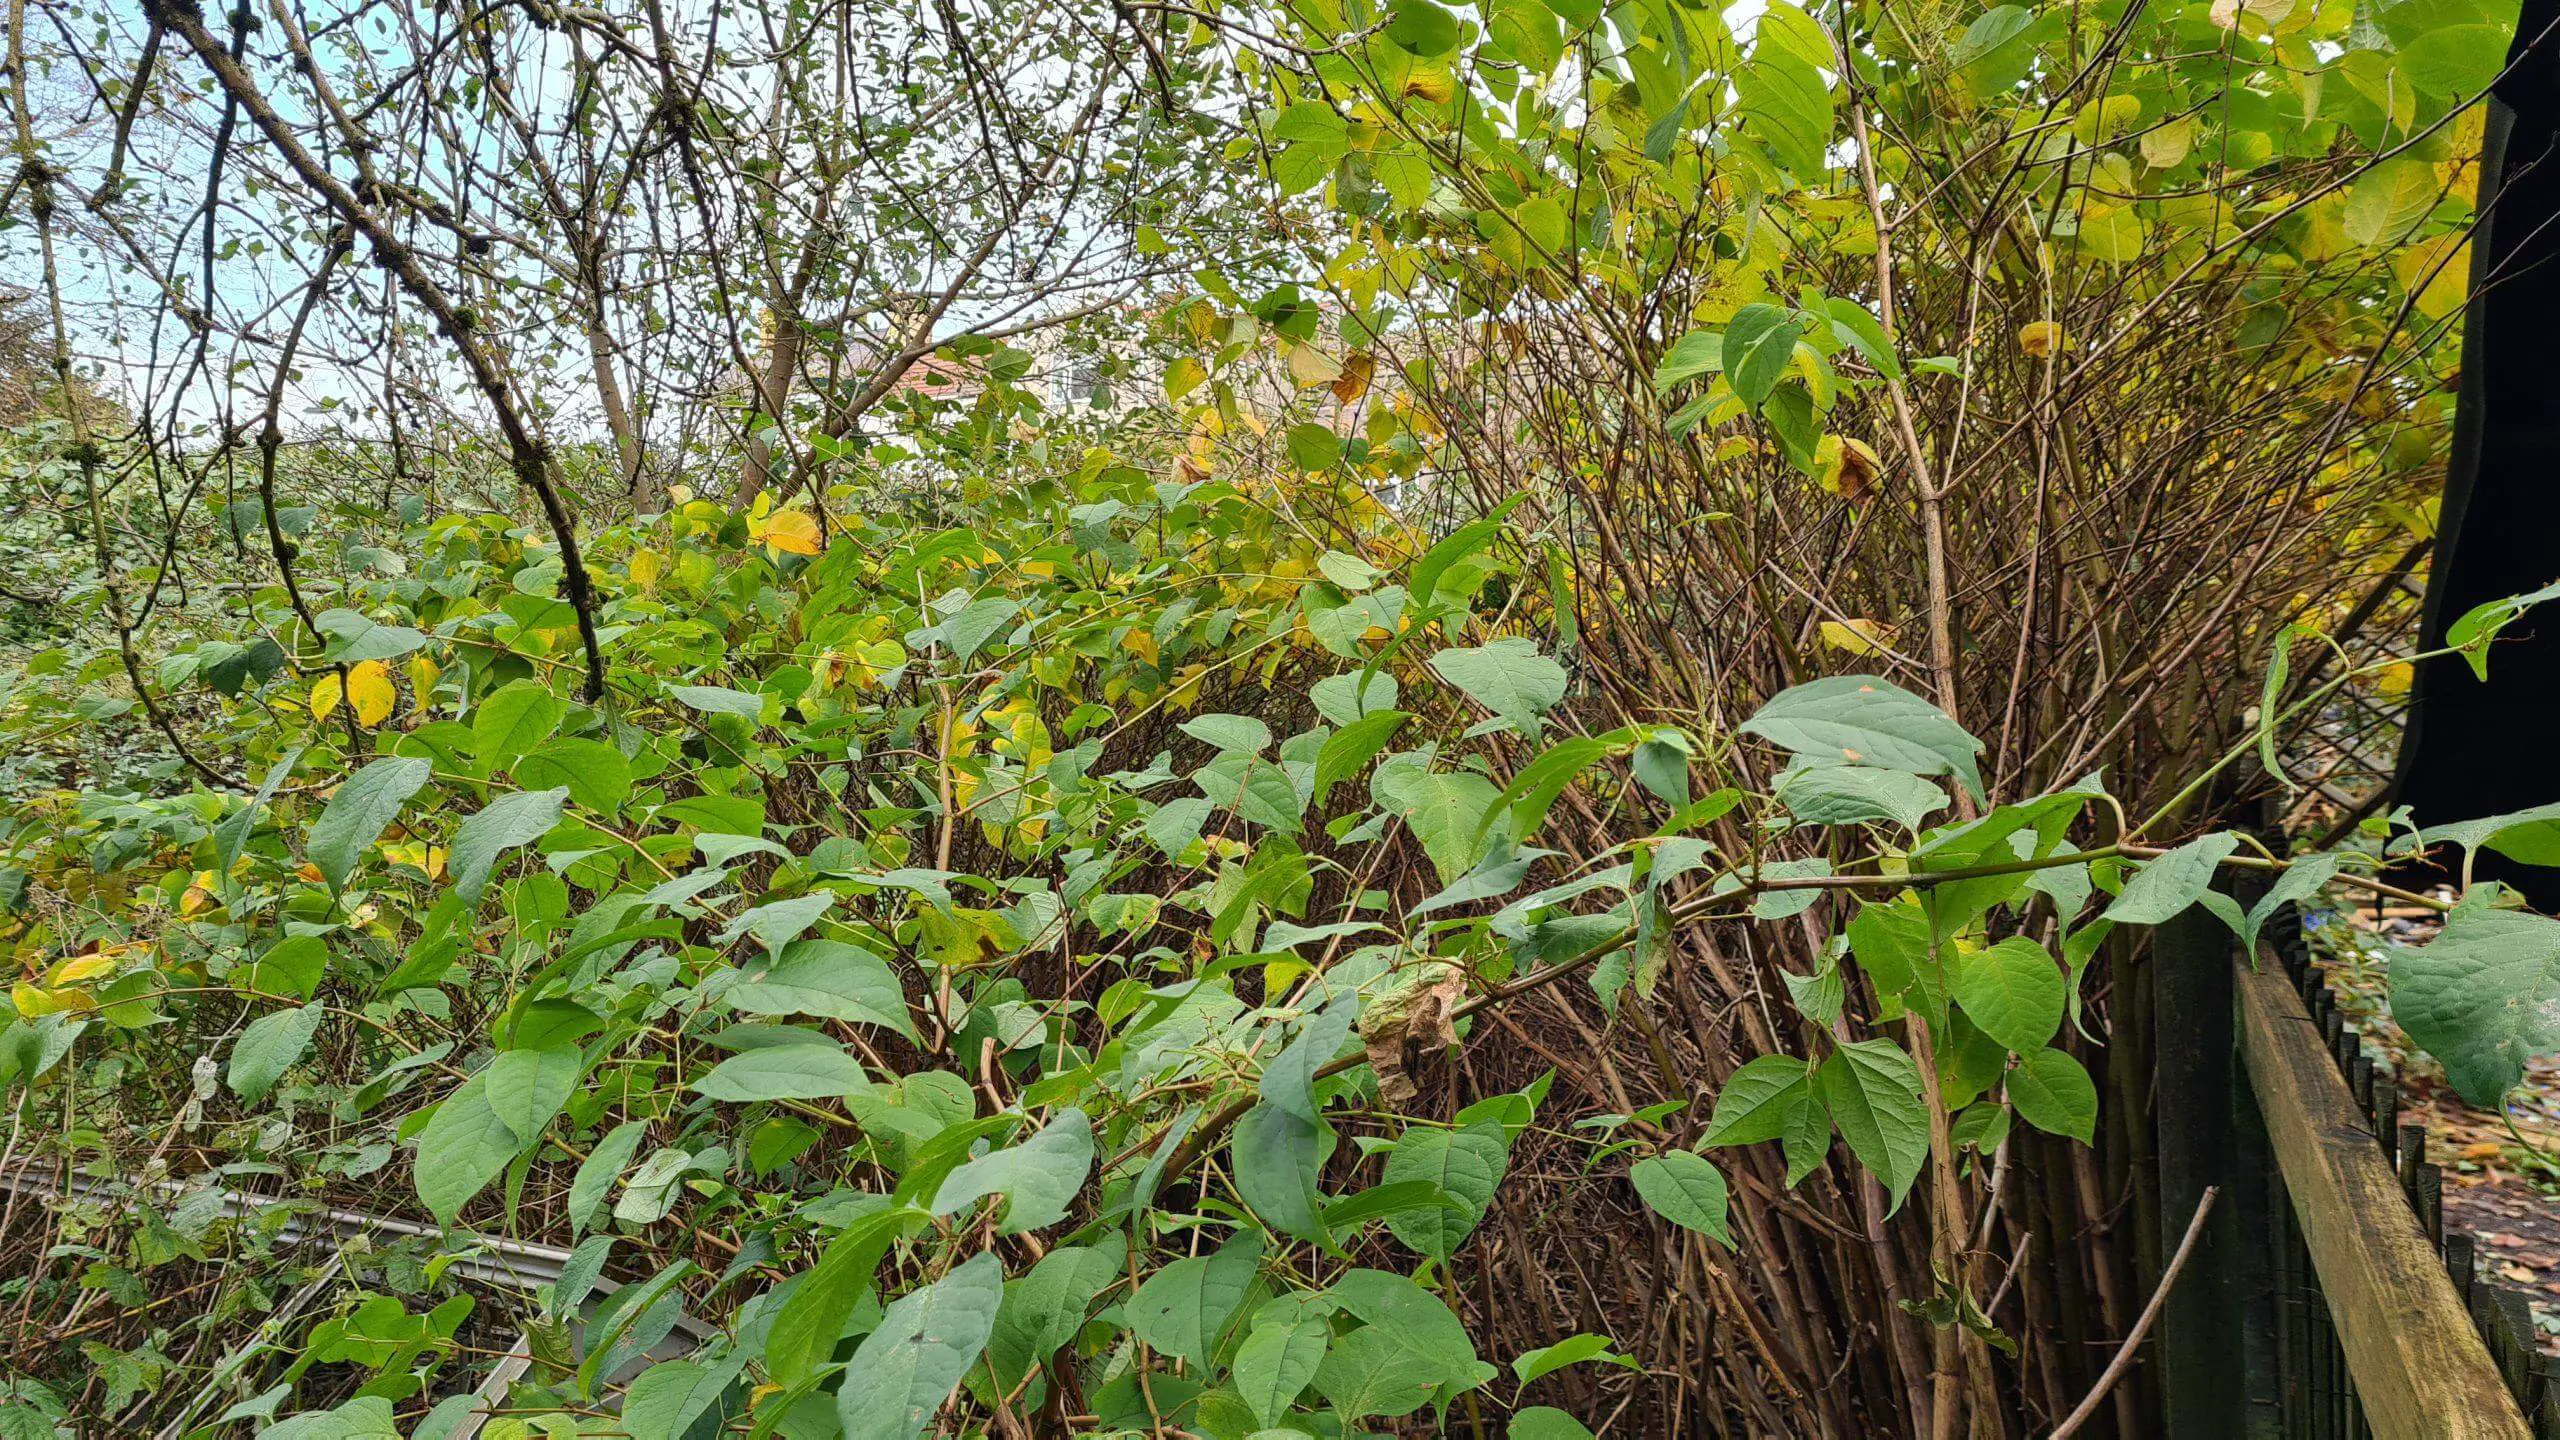 Japanese knotweed in Autumn beginning to decay and go dormant for the winter